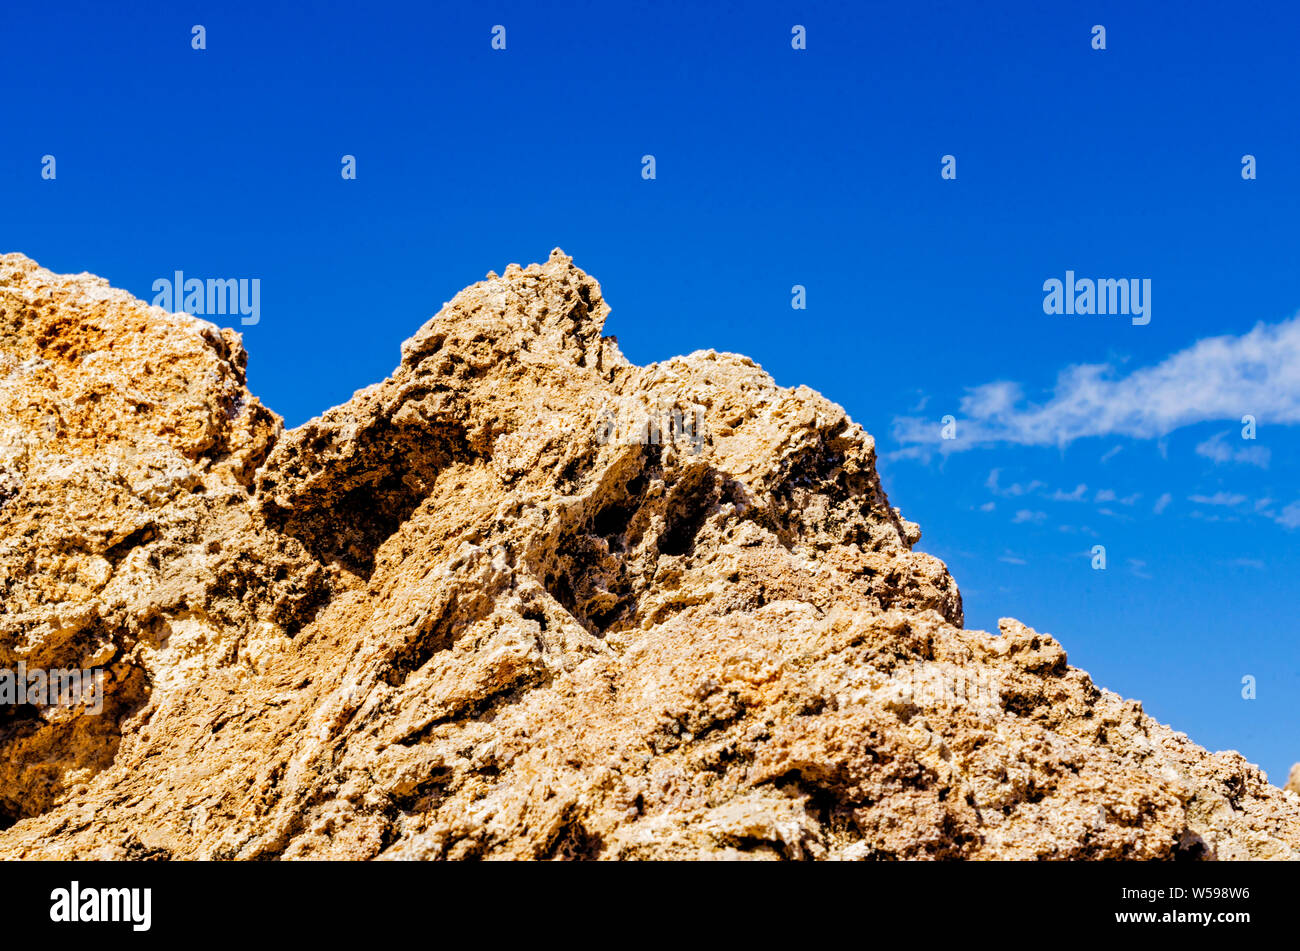 Rough jagged rocky peak against blue sky with white cloud. Stock Photo